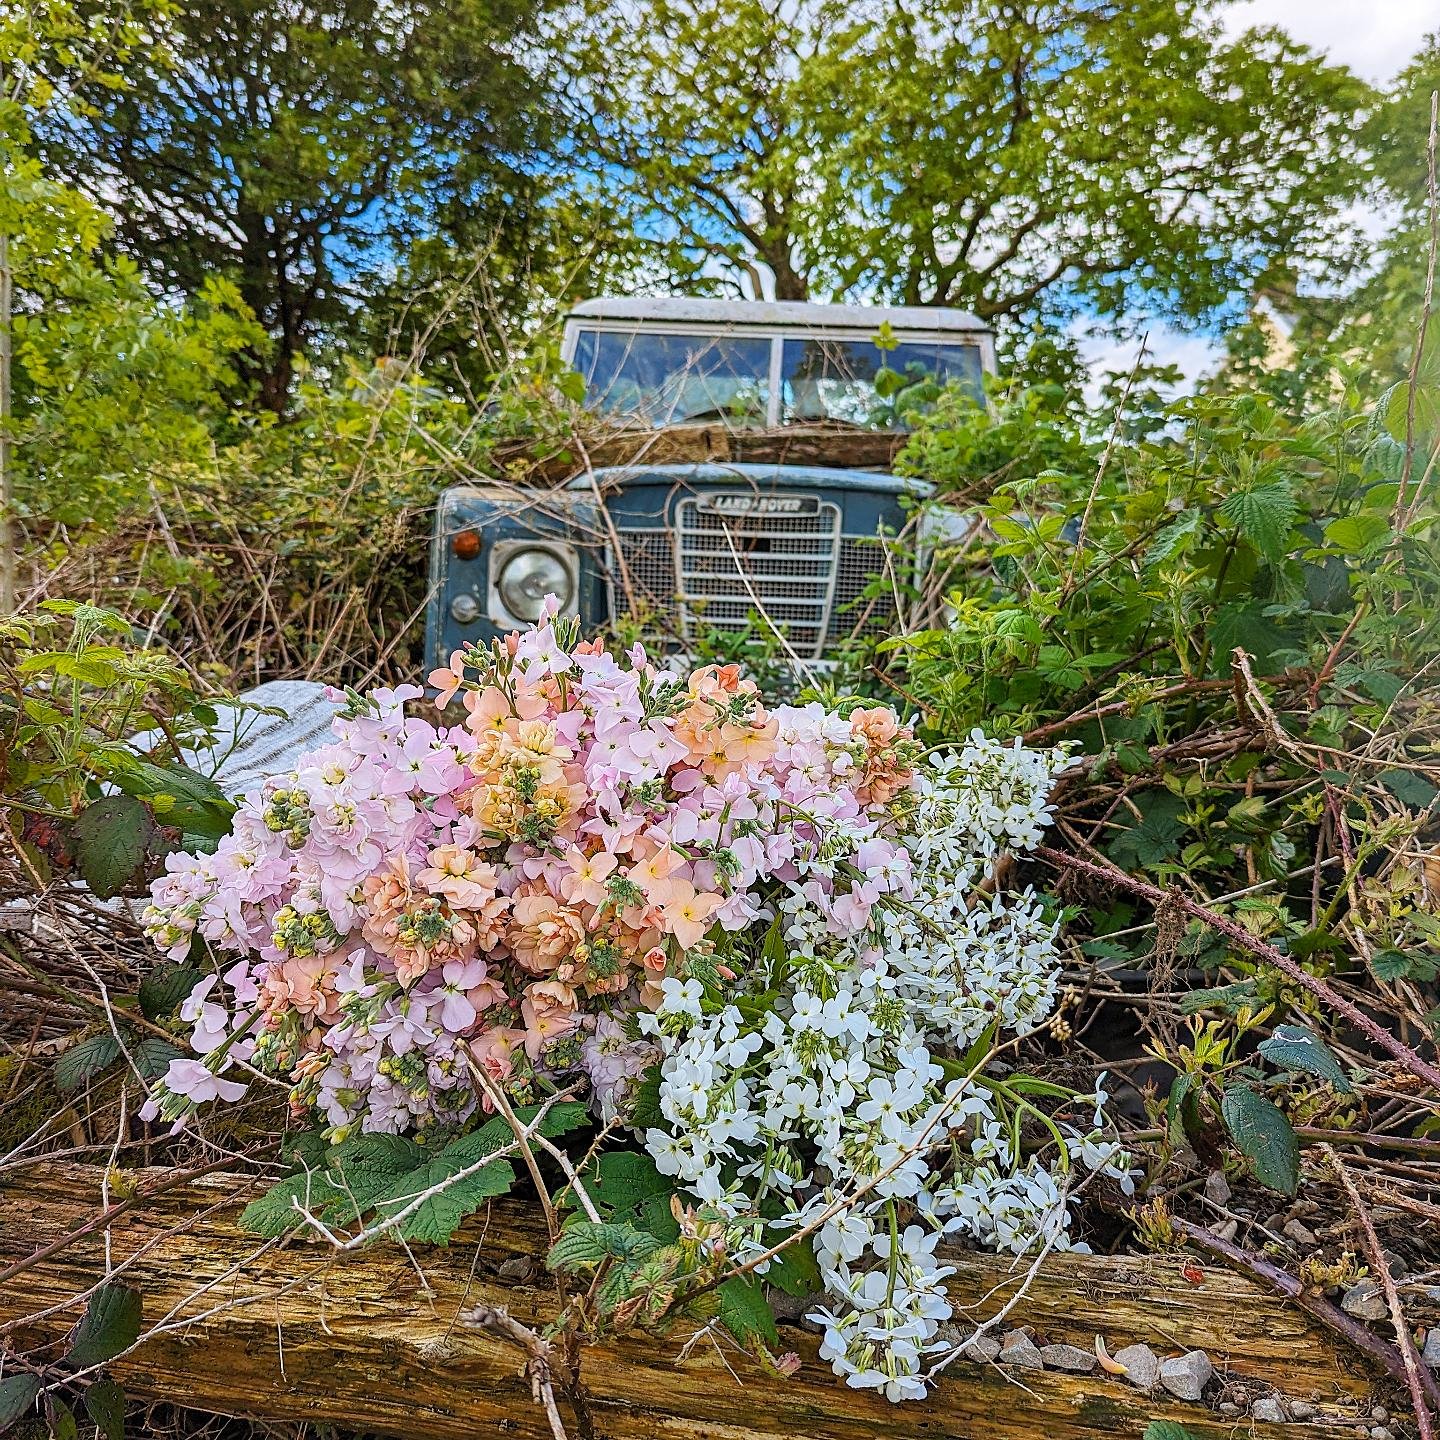 All winter long I have been driving past this sad abandoned Landy at the farm, thinking what a great prop it would make when I have some frothy flowers.

Yesterday I got my chance as the car was full of Stocks. I set up the shot only to realise that 